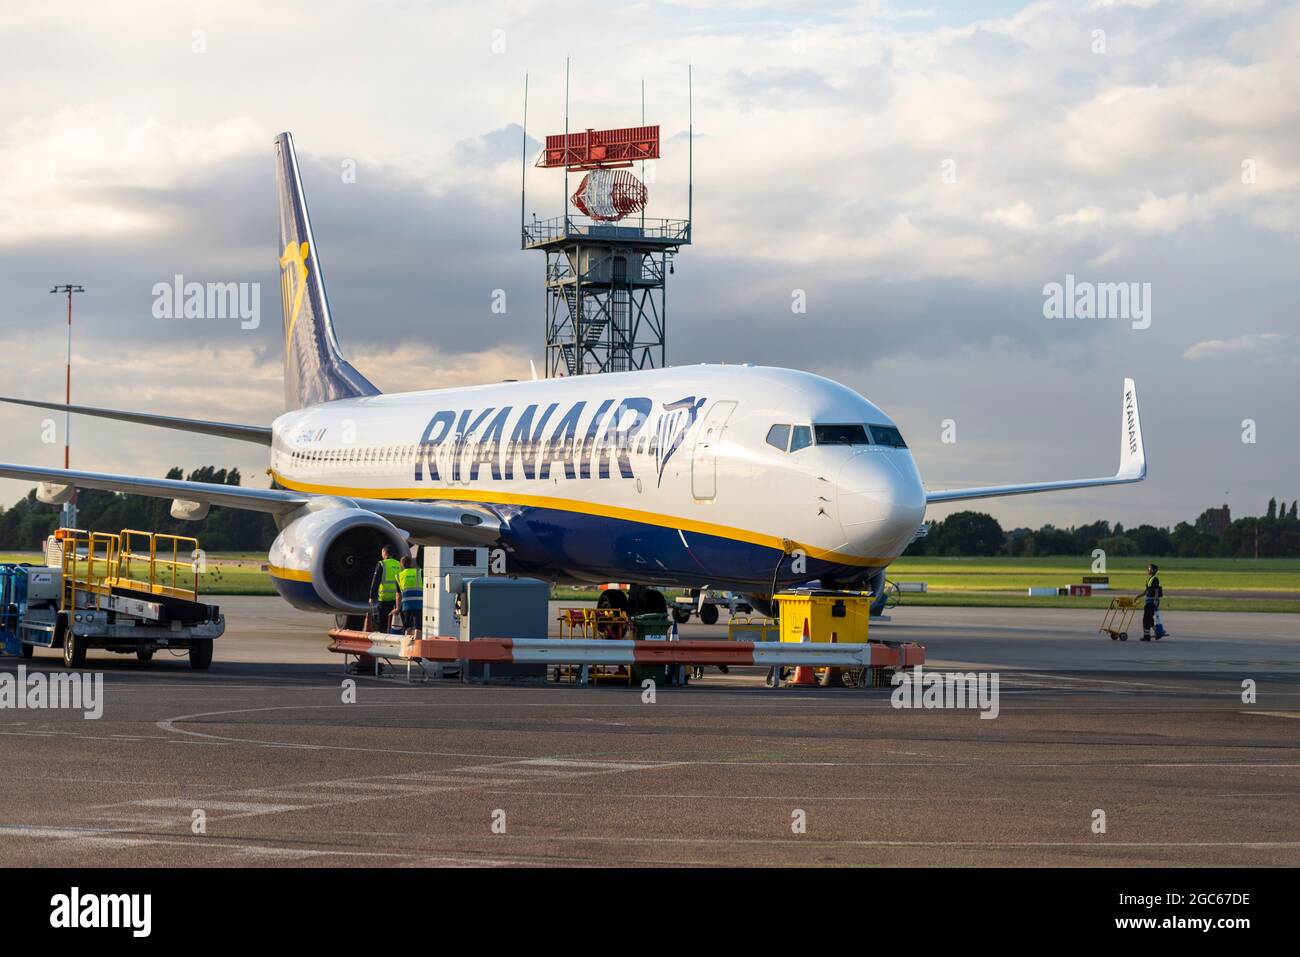 Ryanair 737 on stand at London Southend Airport, Essex, UK after arrival from Malaga, Spain, shortly after announcement that Ryanair are leaving Stock Photo